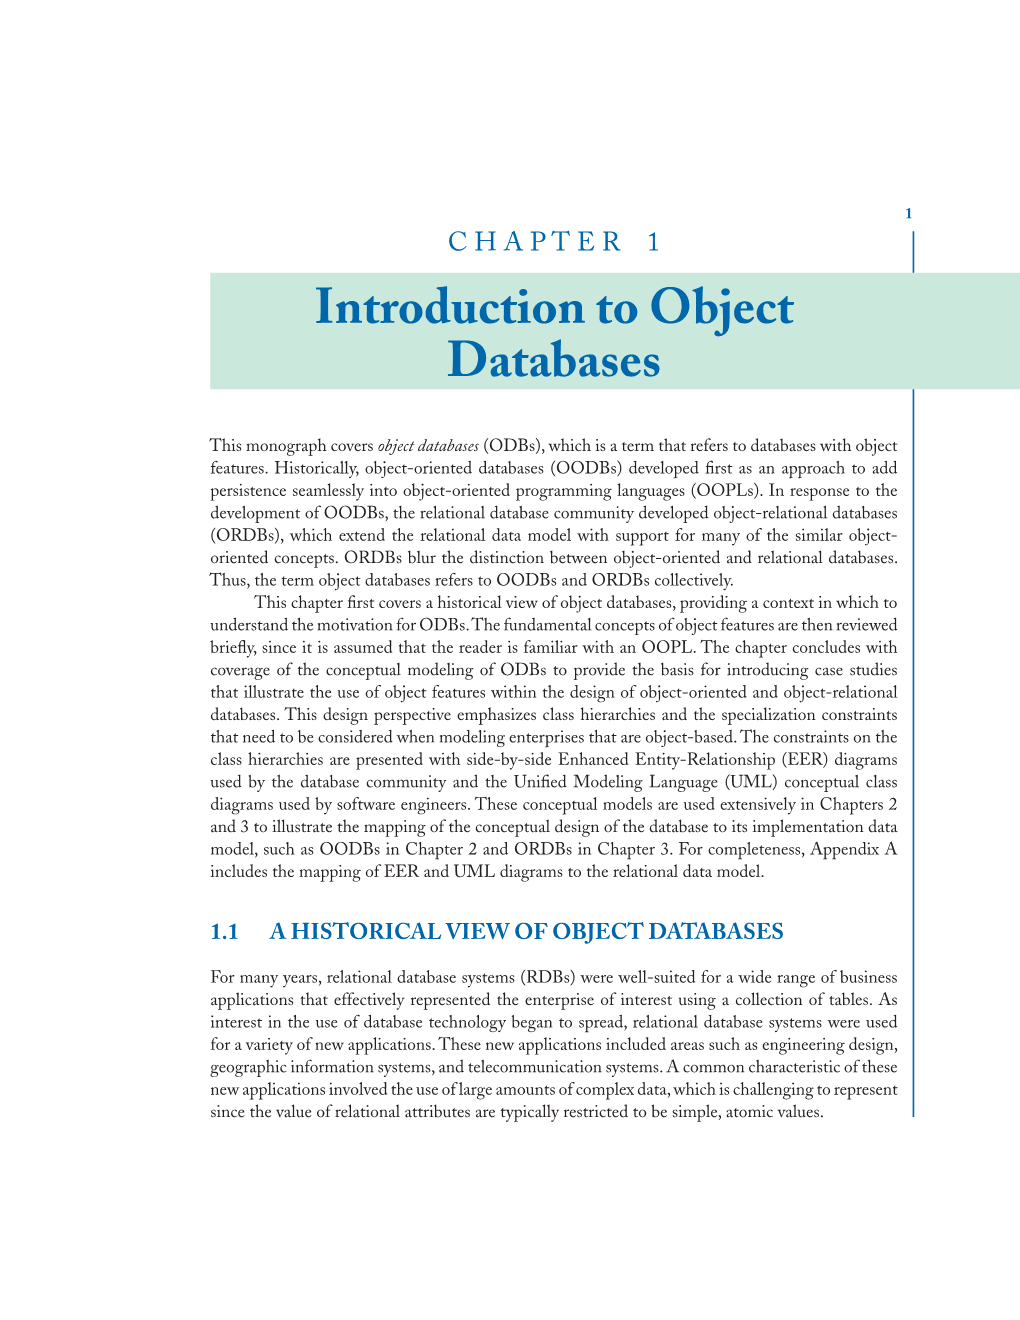 Fundamentals of Object Databases: Object-Oriented and Object